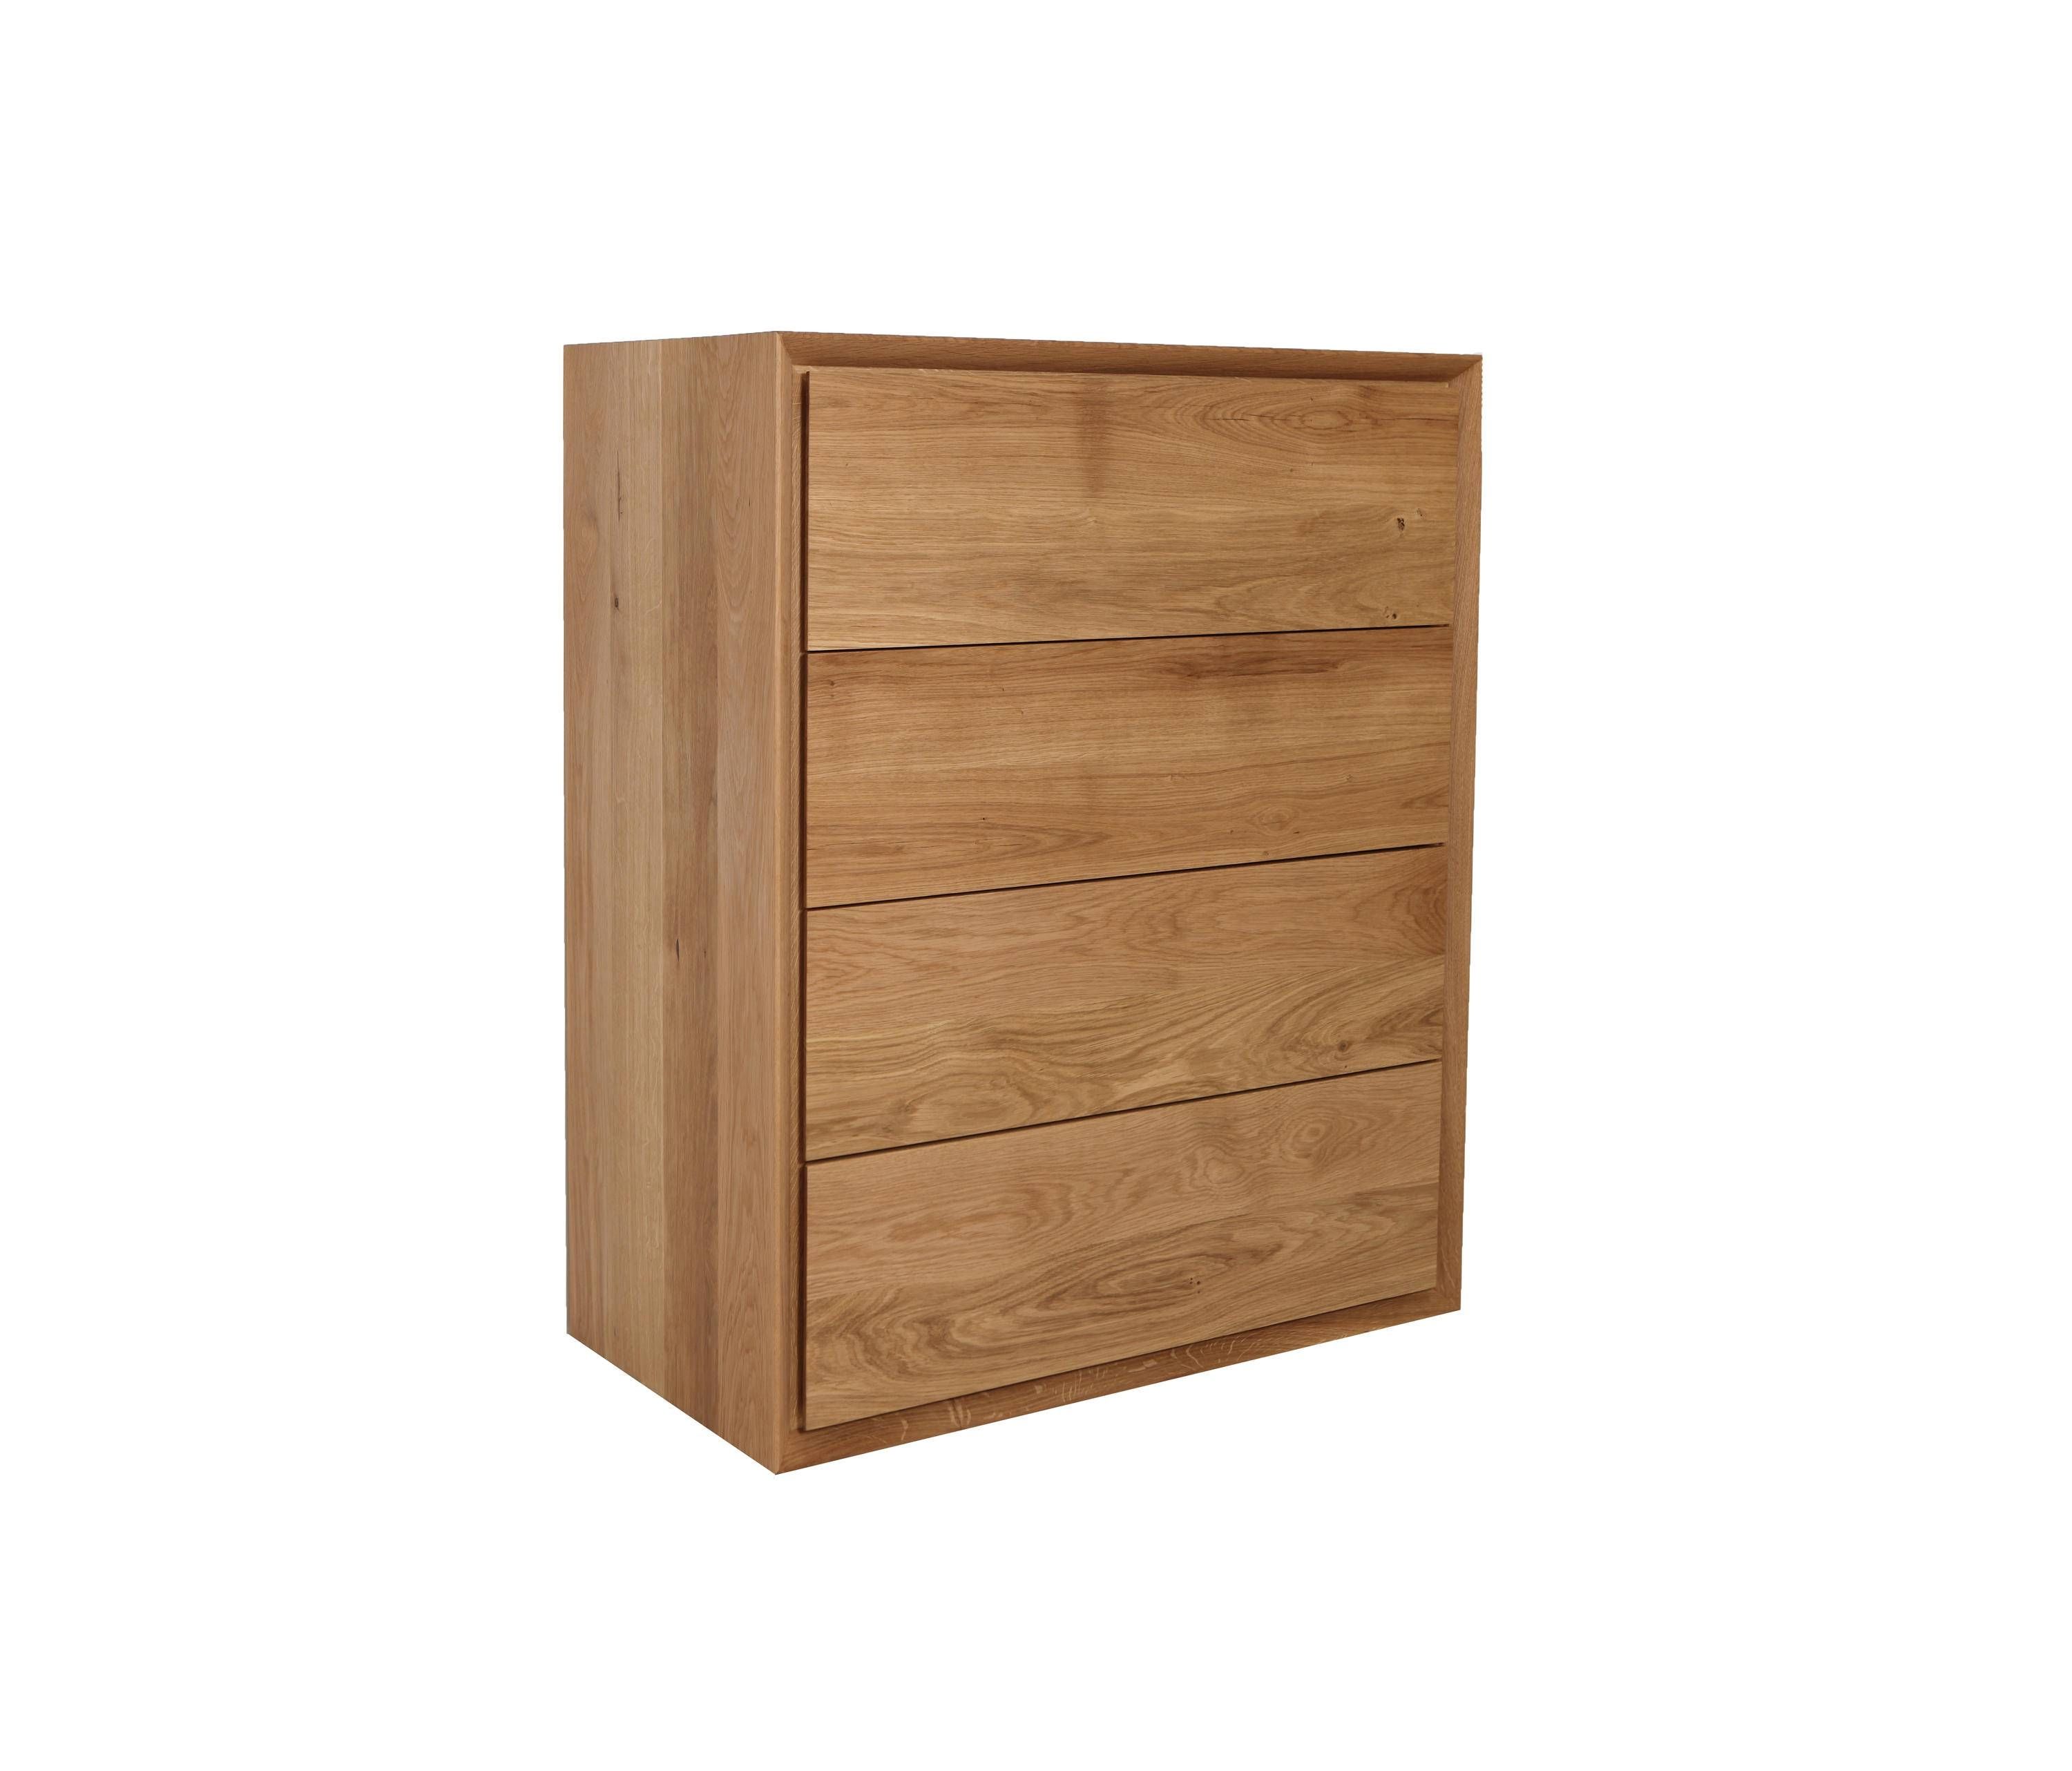 Gracia Highboard Kommode – Sideboards From Made In Taunus | Architonic For Newest Kommoden Sideboards (View 12 of 15)